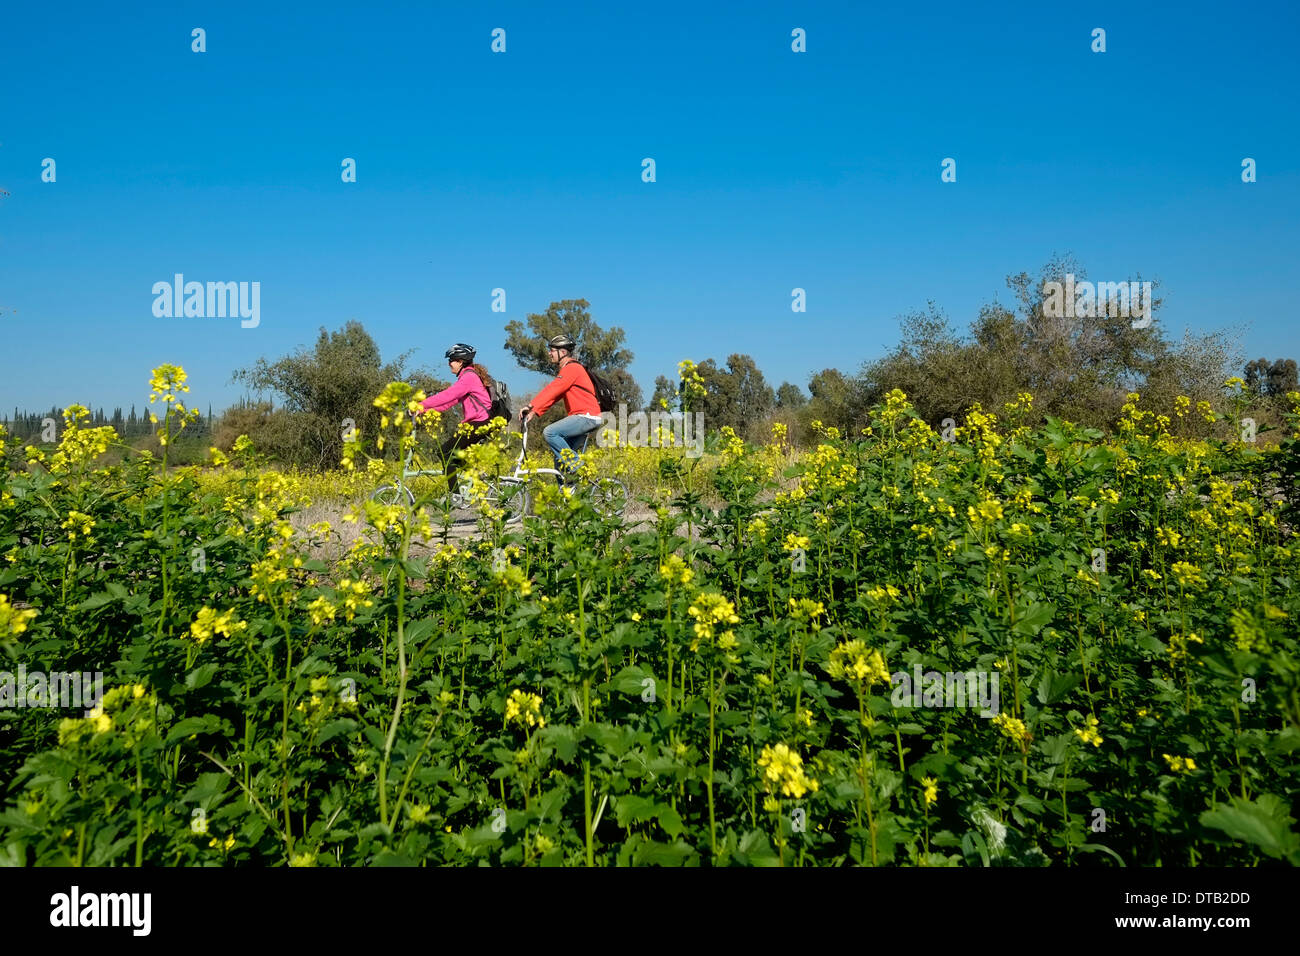 Hikers cycling in the Galilee region northern Israel Stock Photo